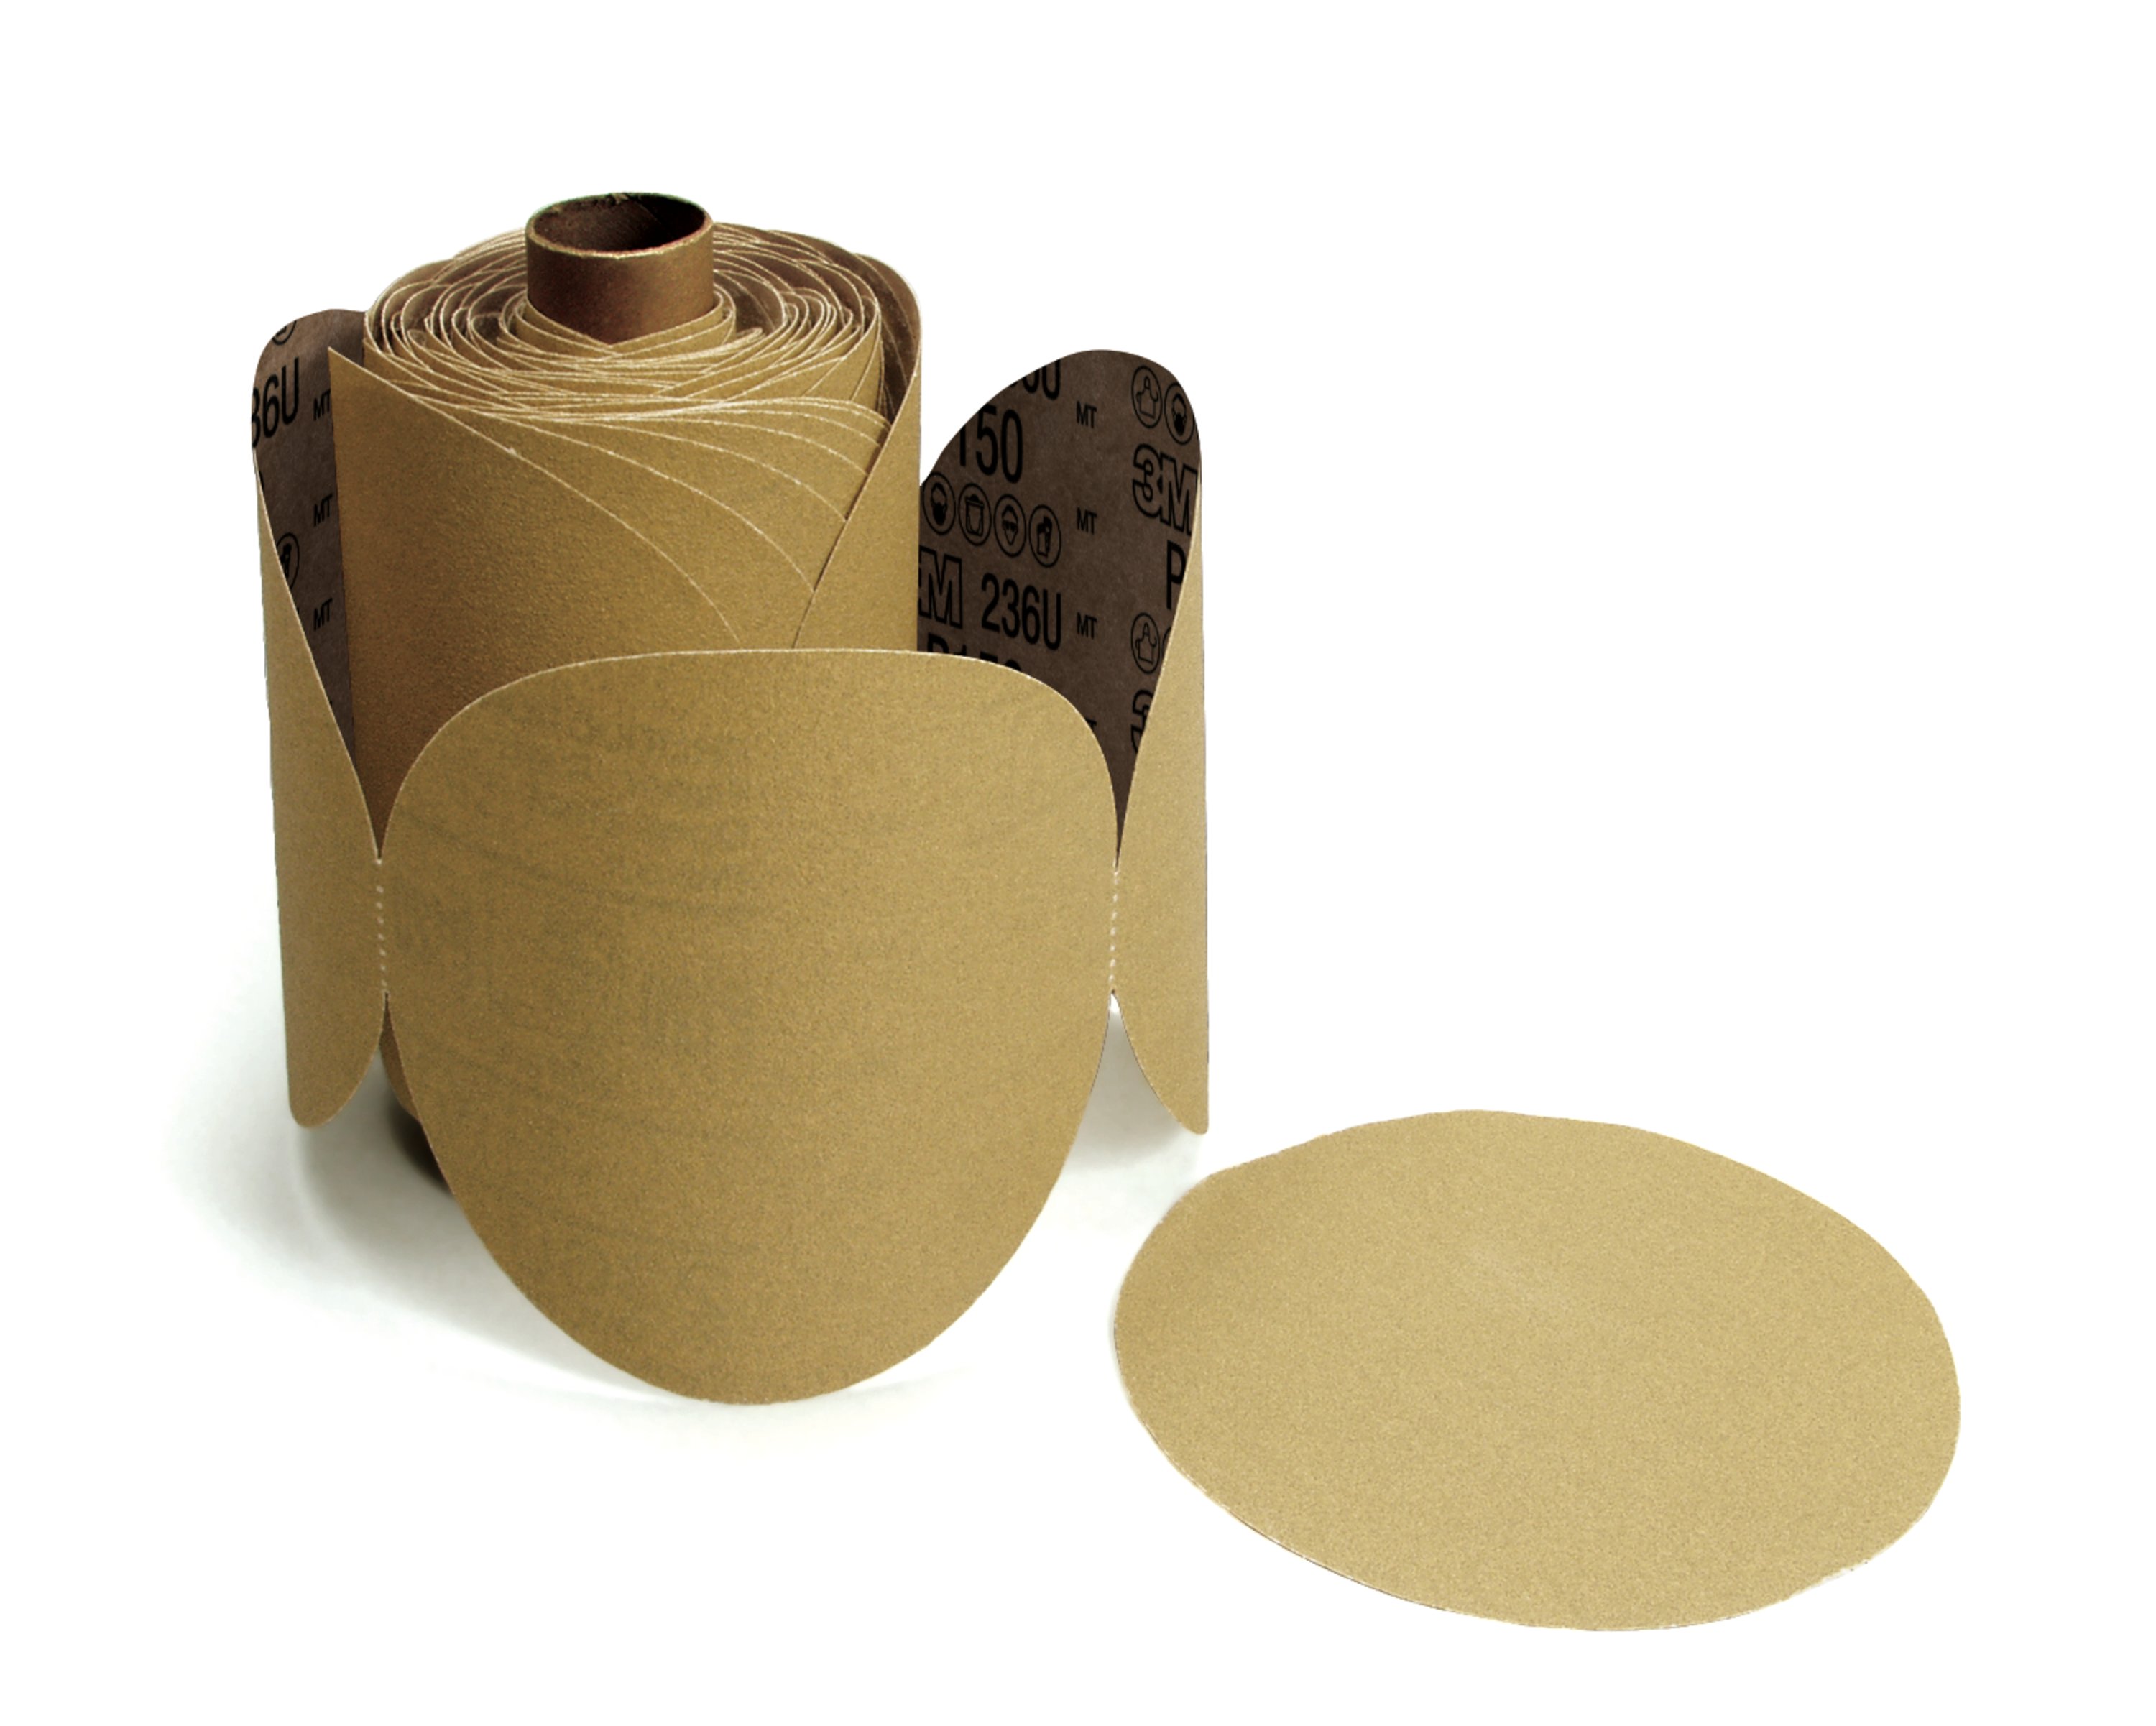 3M™ Stikit™ disc rolls are multiple adhesive-backed abrasive discs rolled into a tube